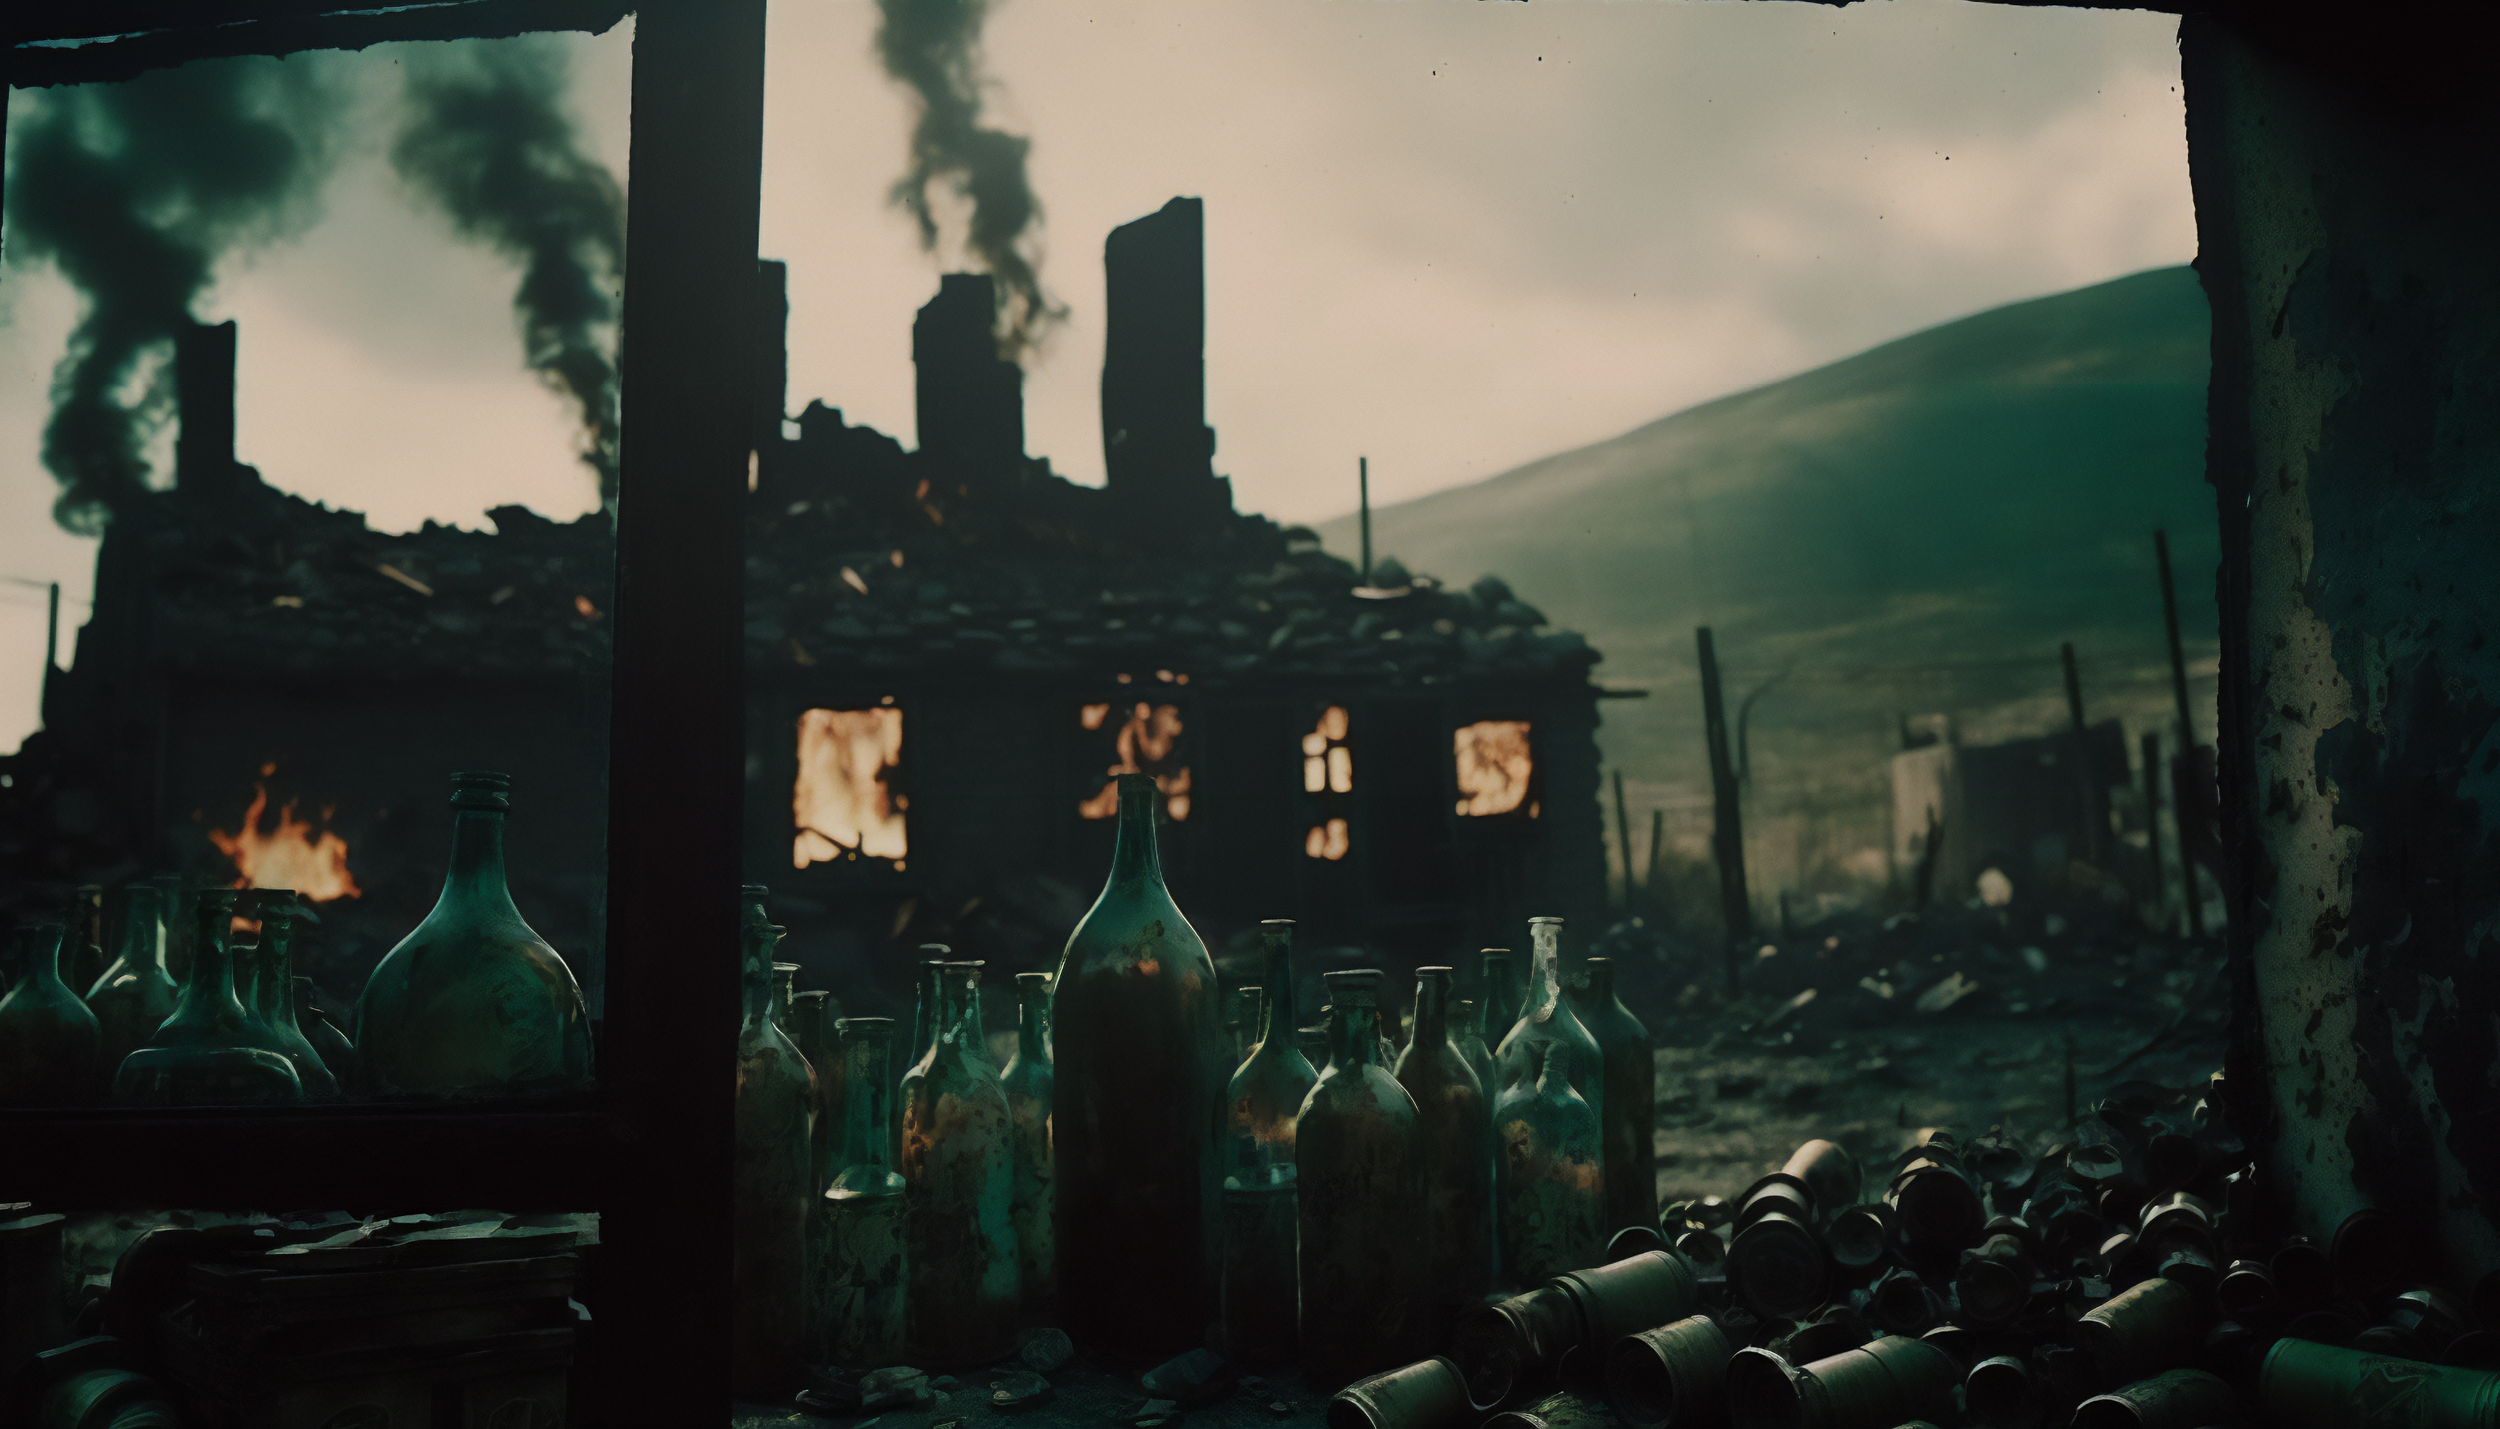 a dystopian image of numerous bottles of wine and liquor on the floor. in the background is a house on fire.